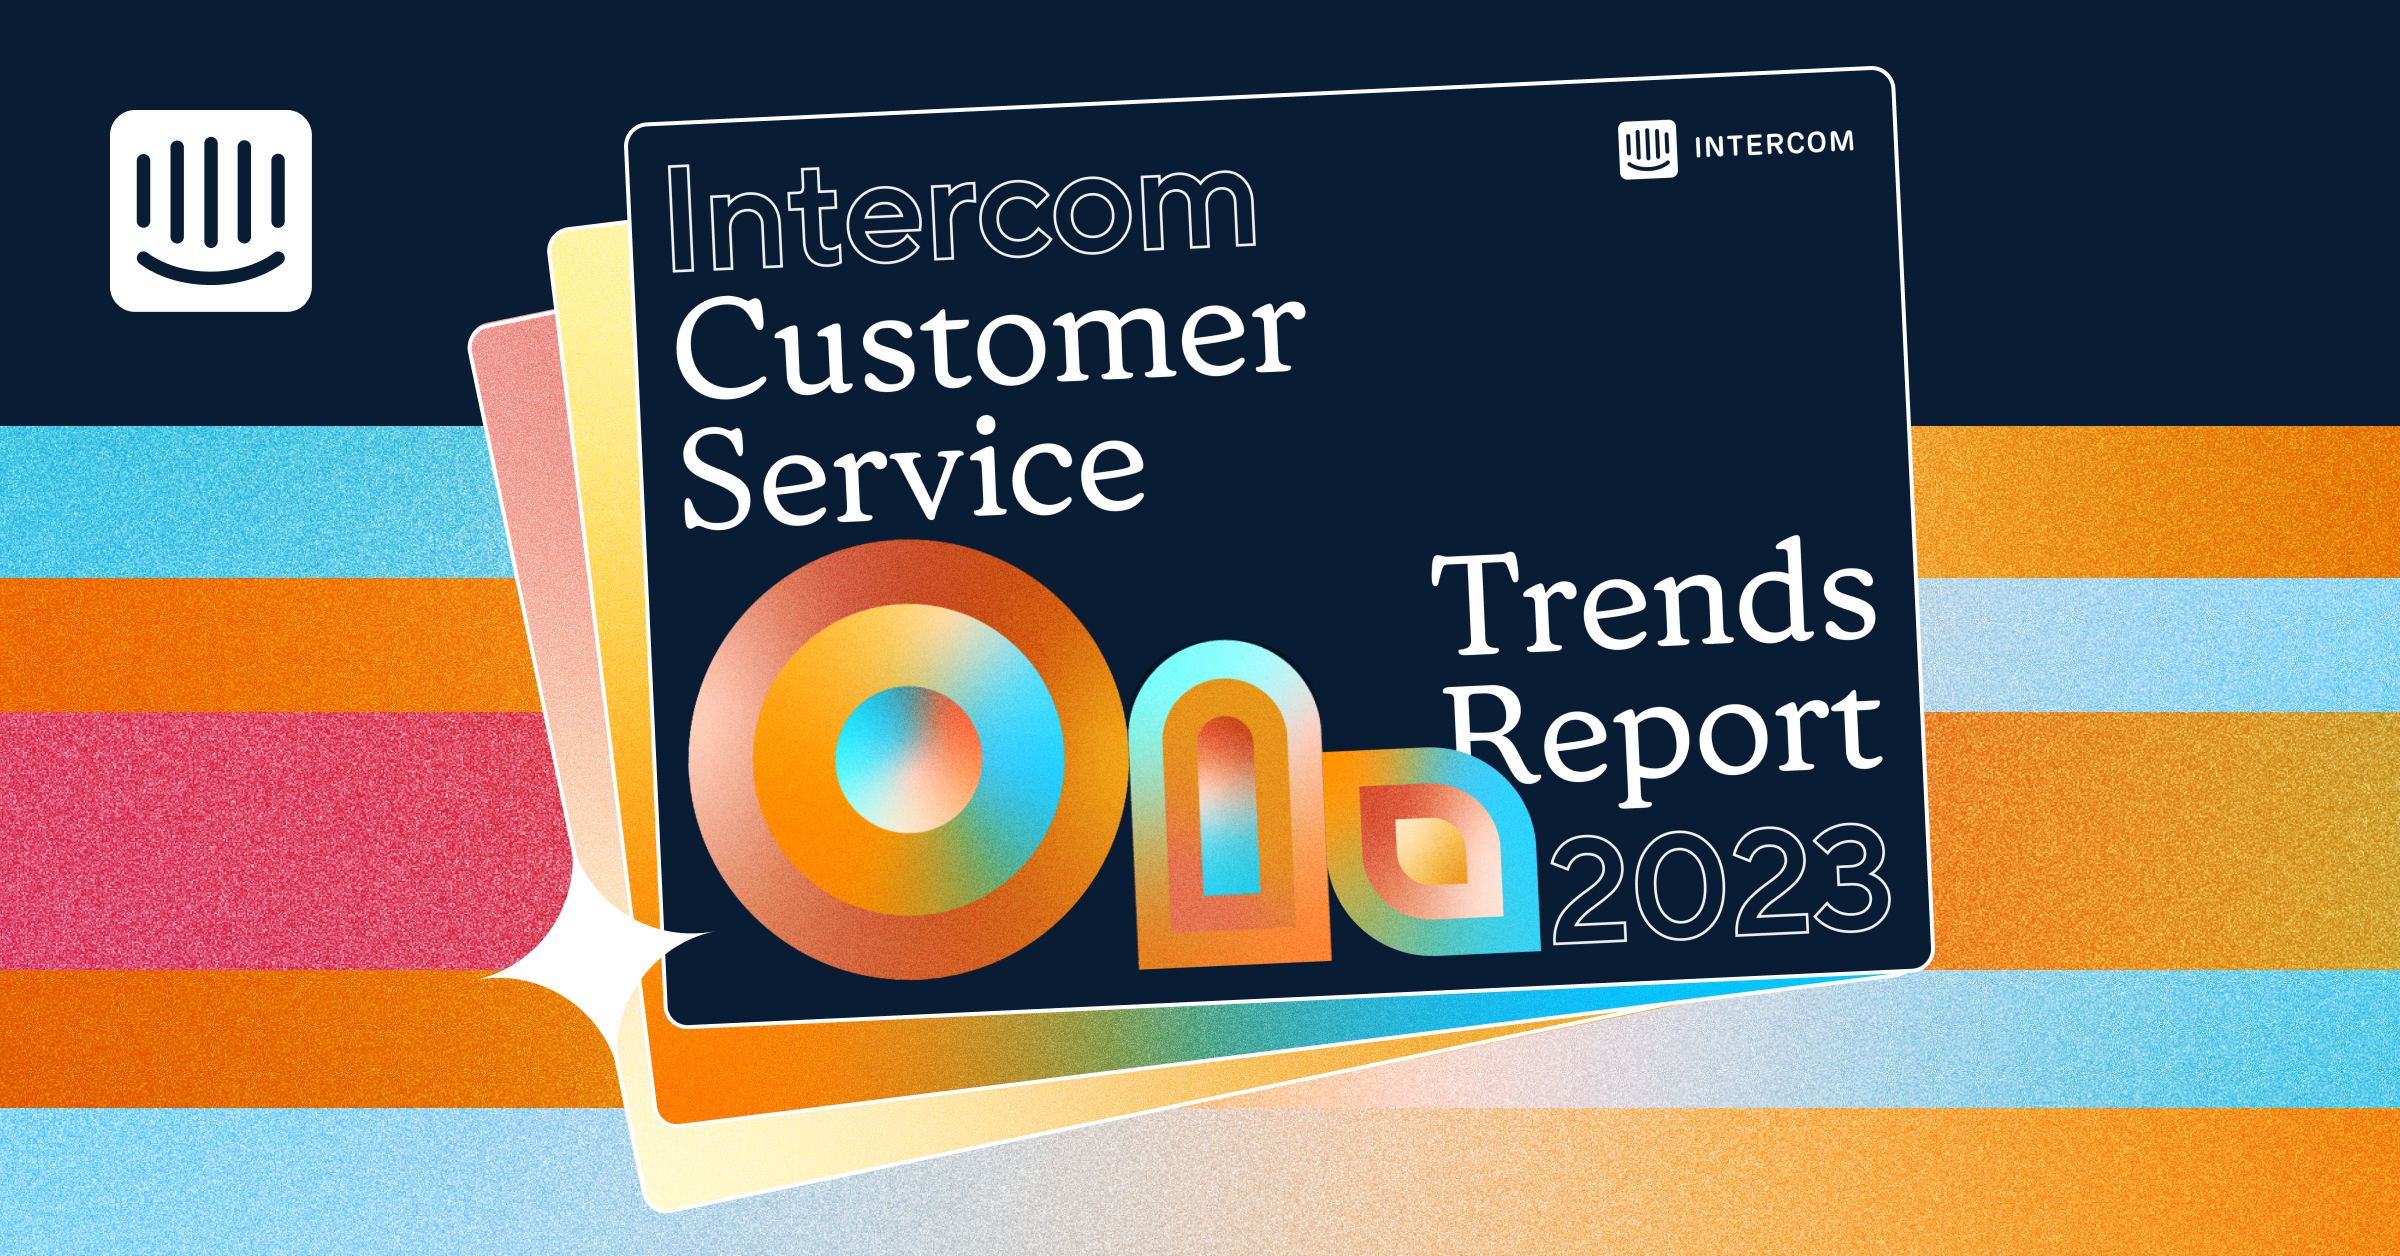 Announcing the Customer Service Trends Report 2023